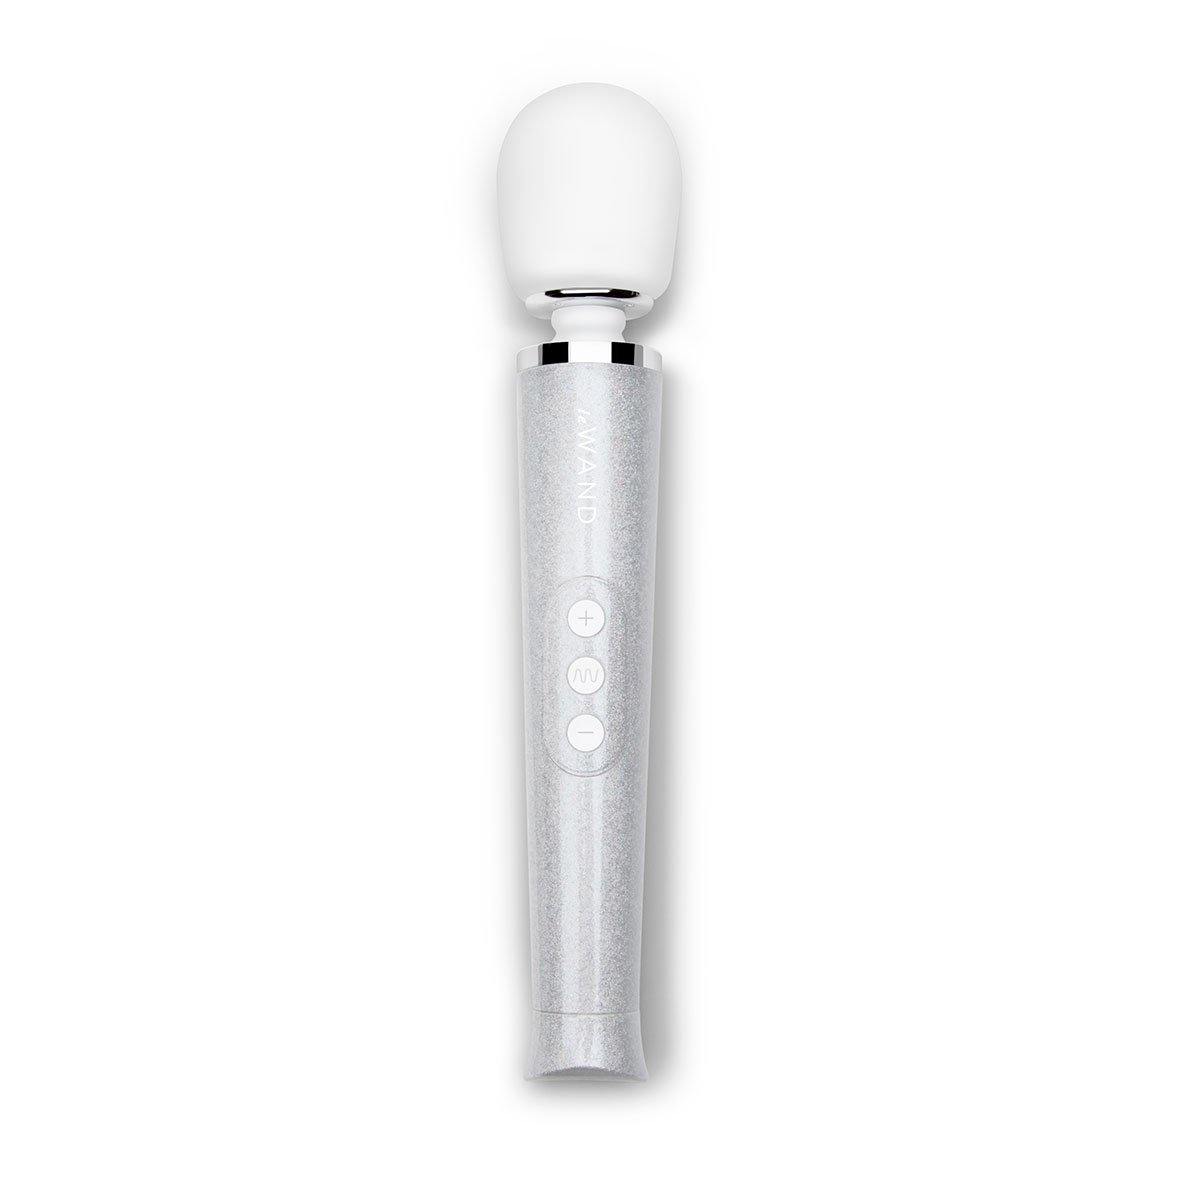 Le Wand - All that Glimmers White - Buy At Luxury Toy X - Free 3-Day Shipping